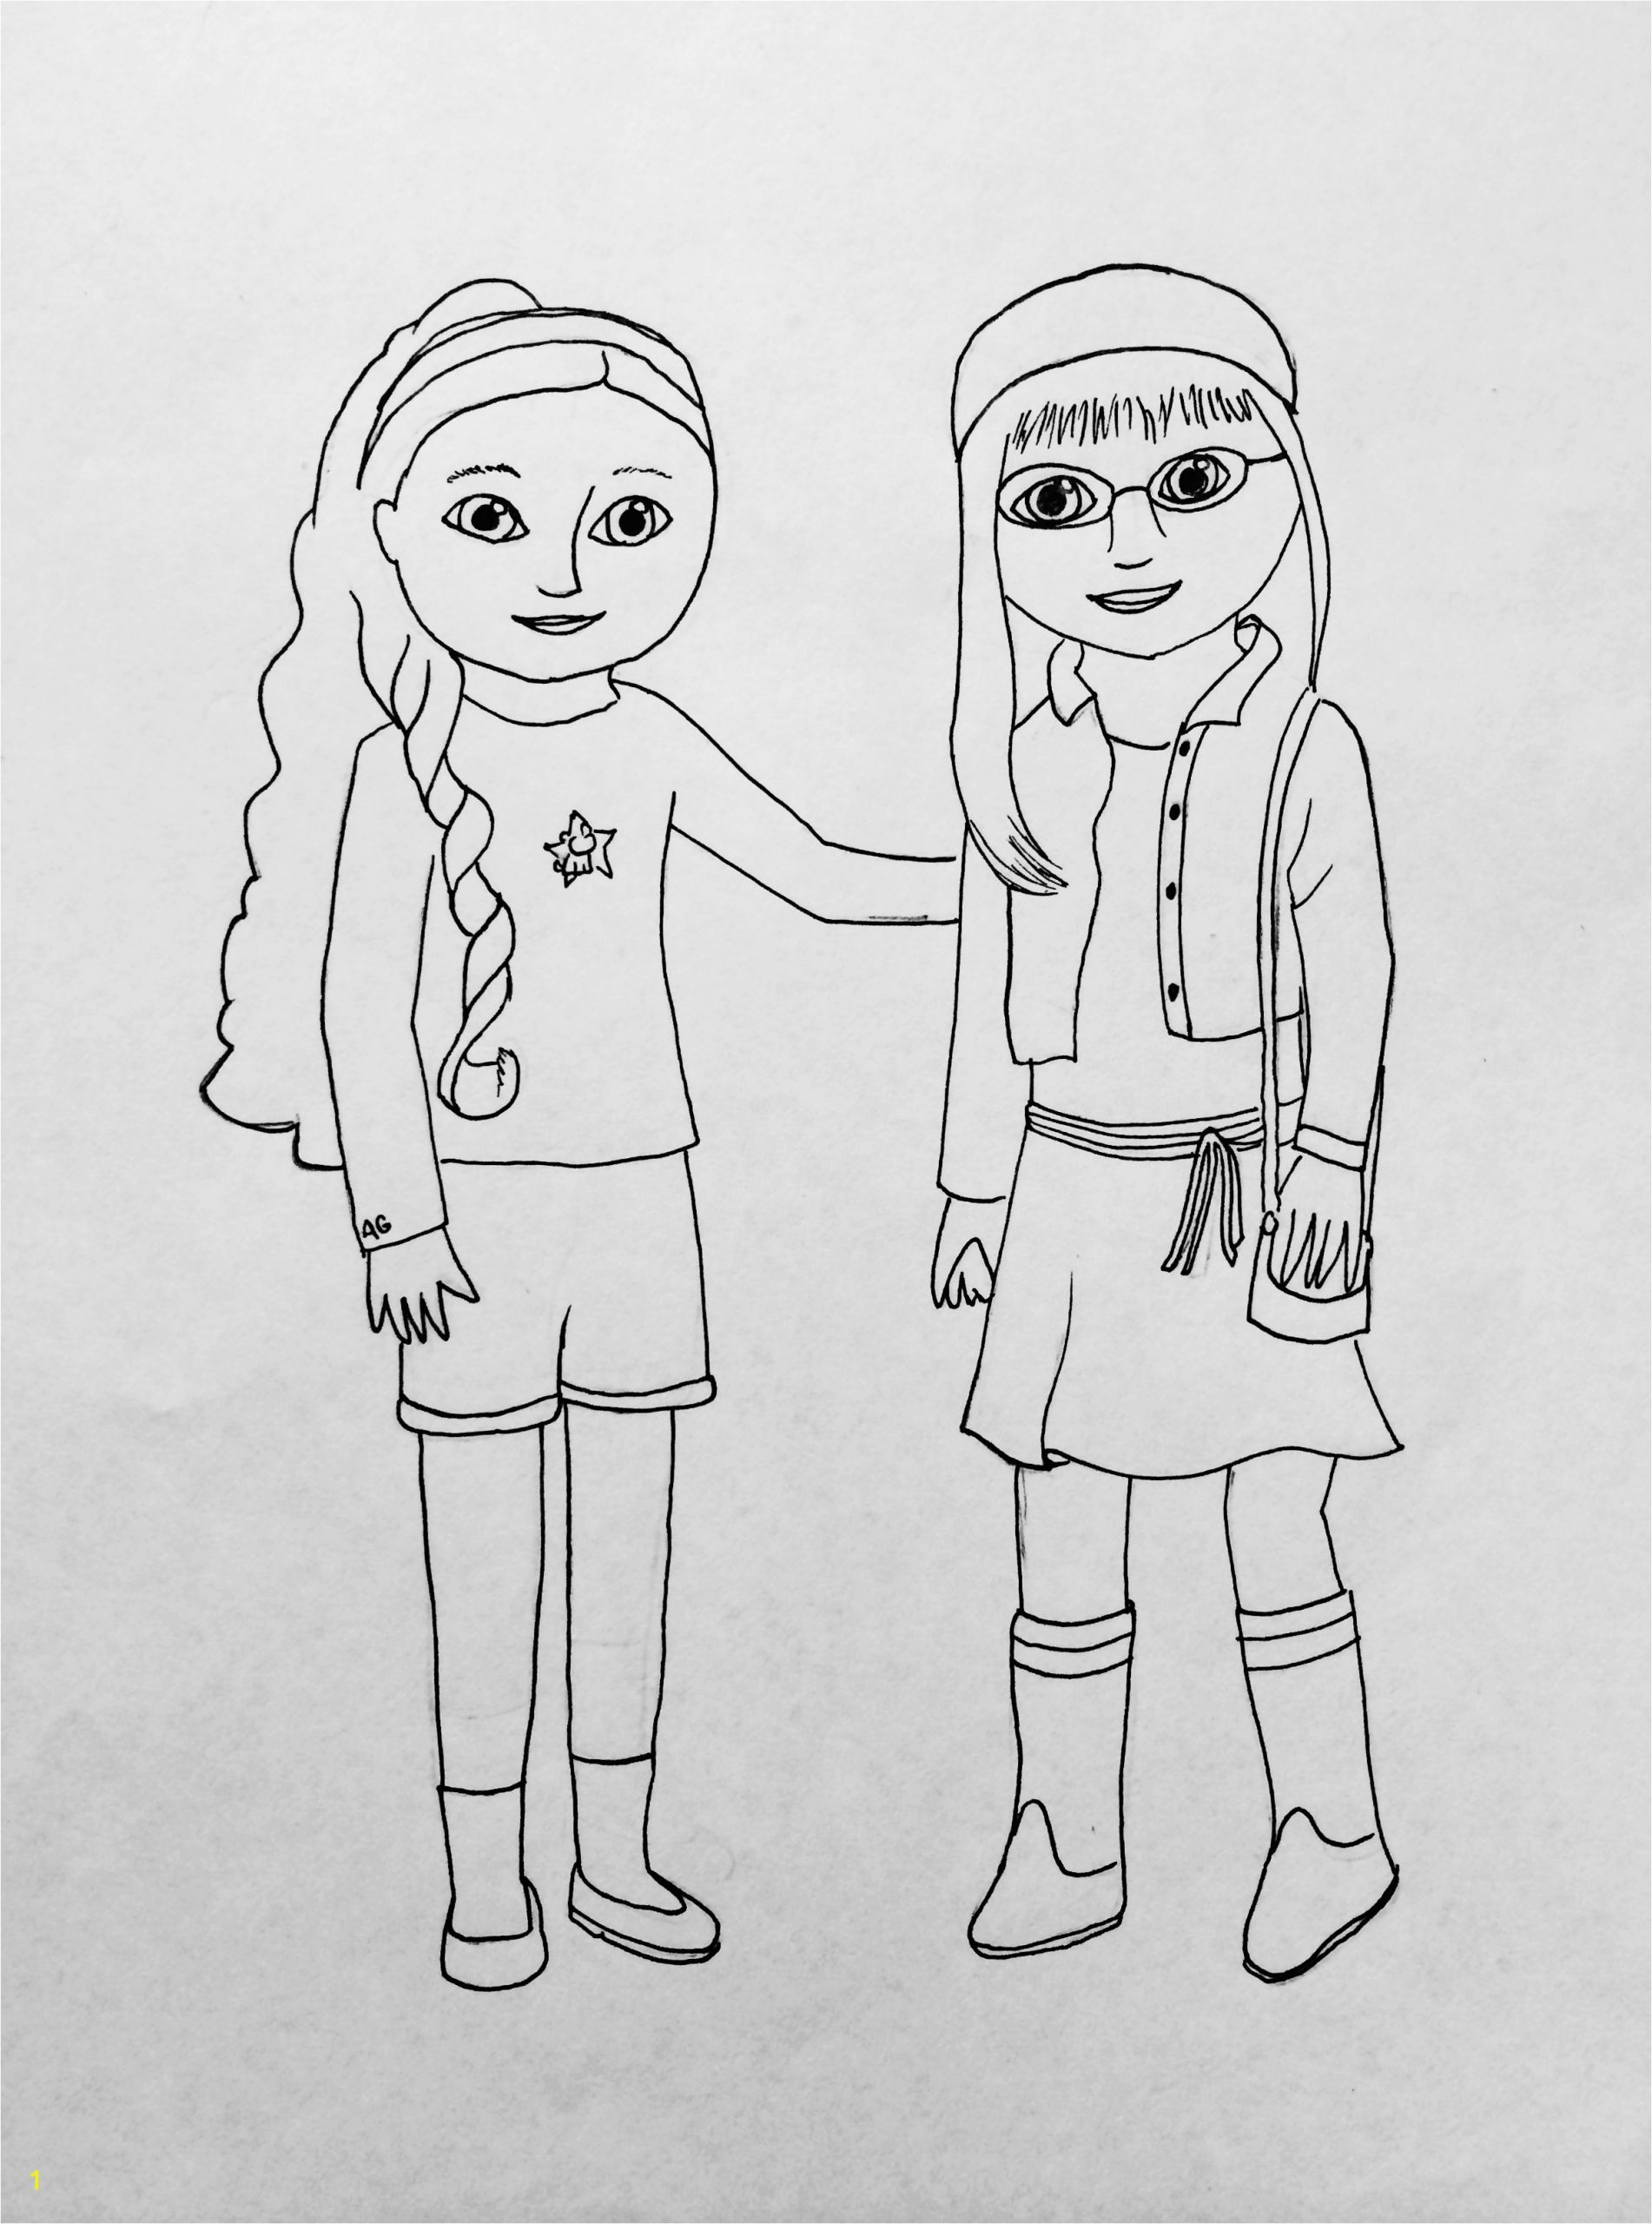 free coloring pages of american girl doll american girl doll coloring pages samantha american girl doll coloring pages saige